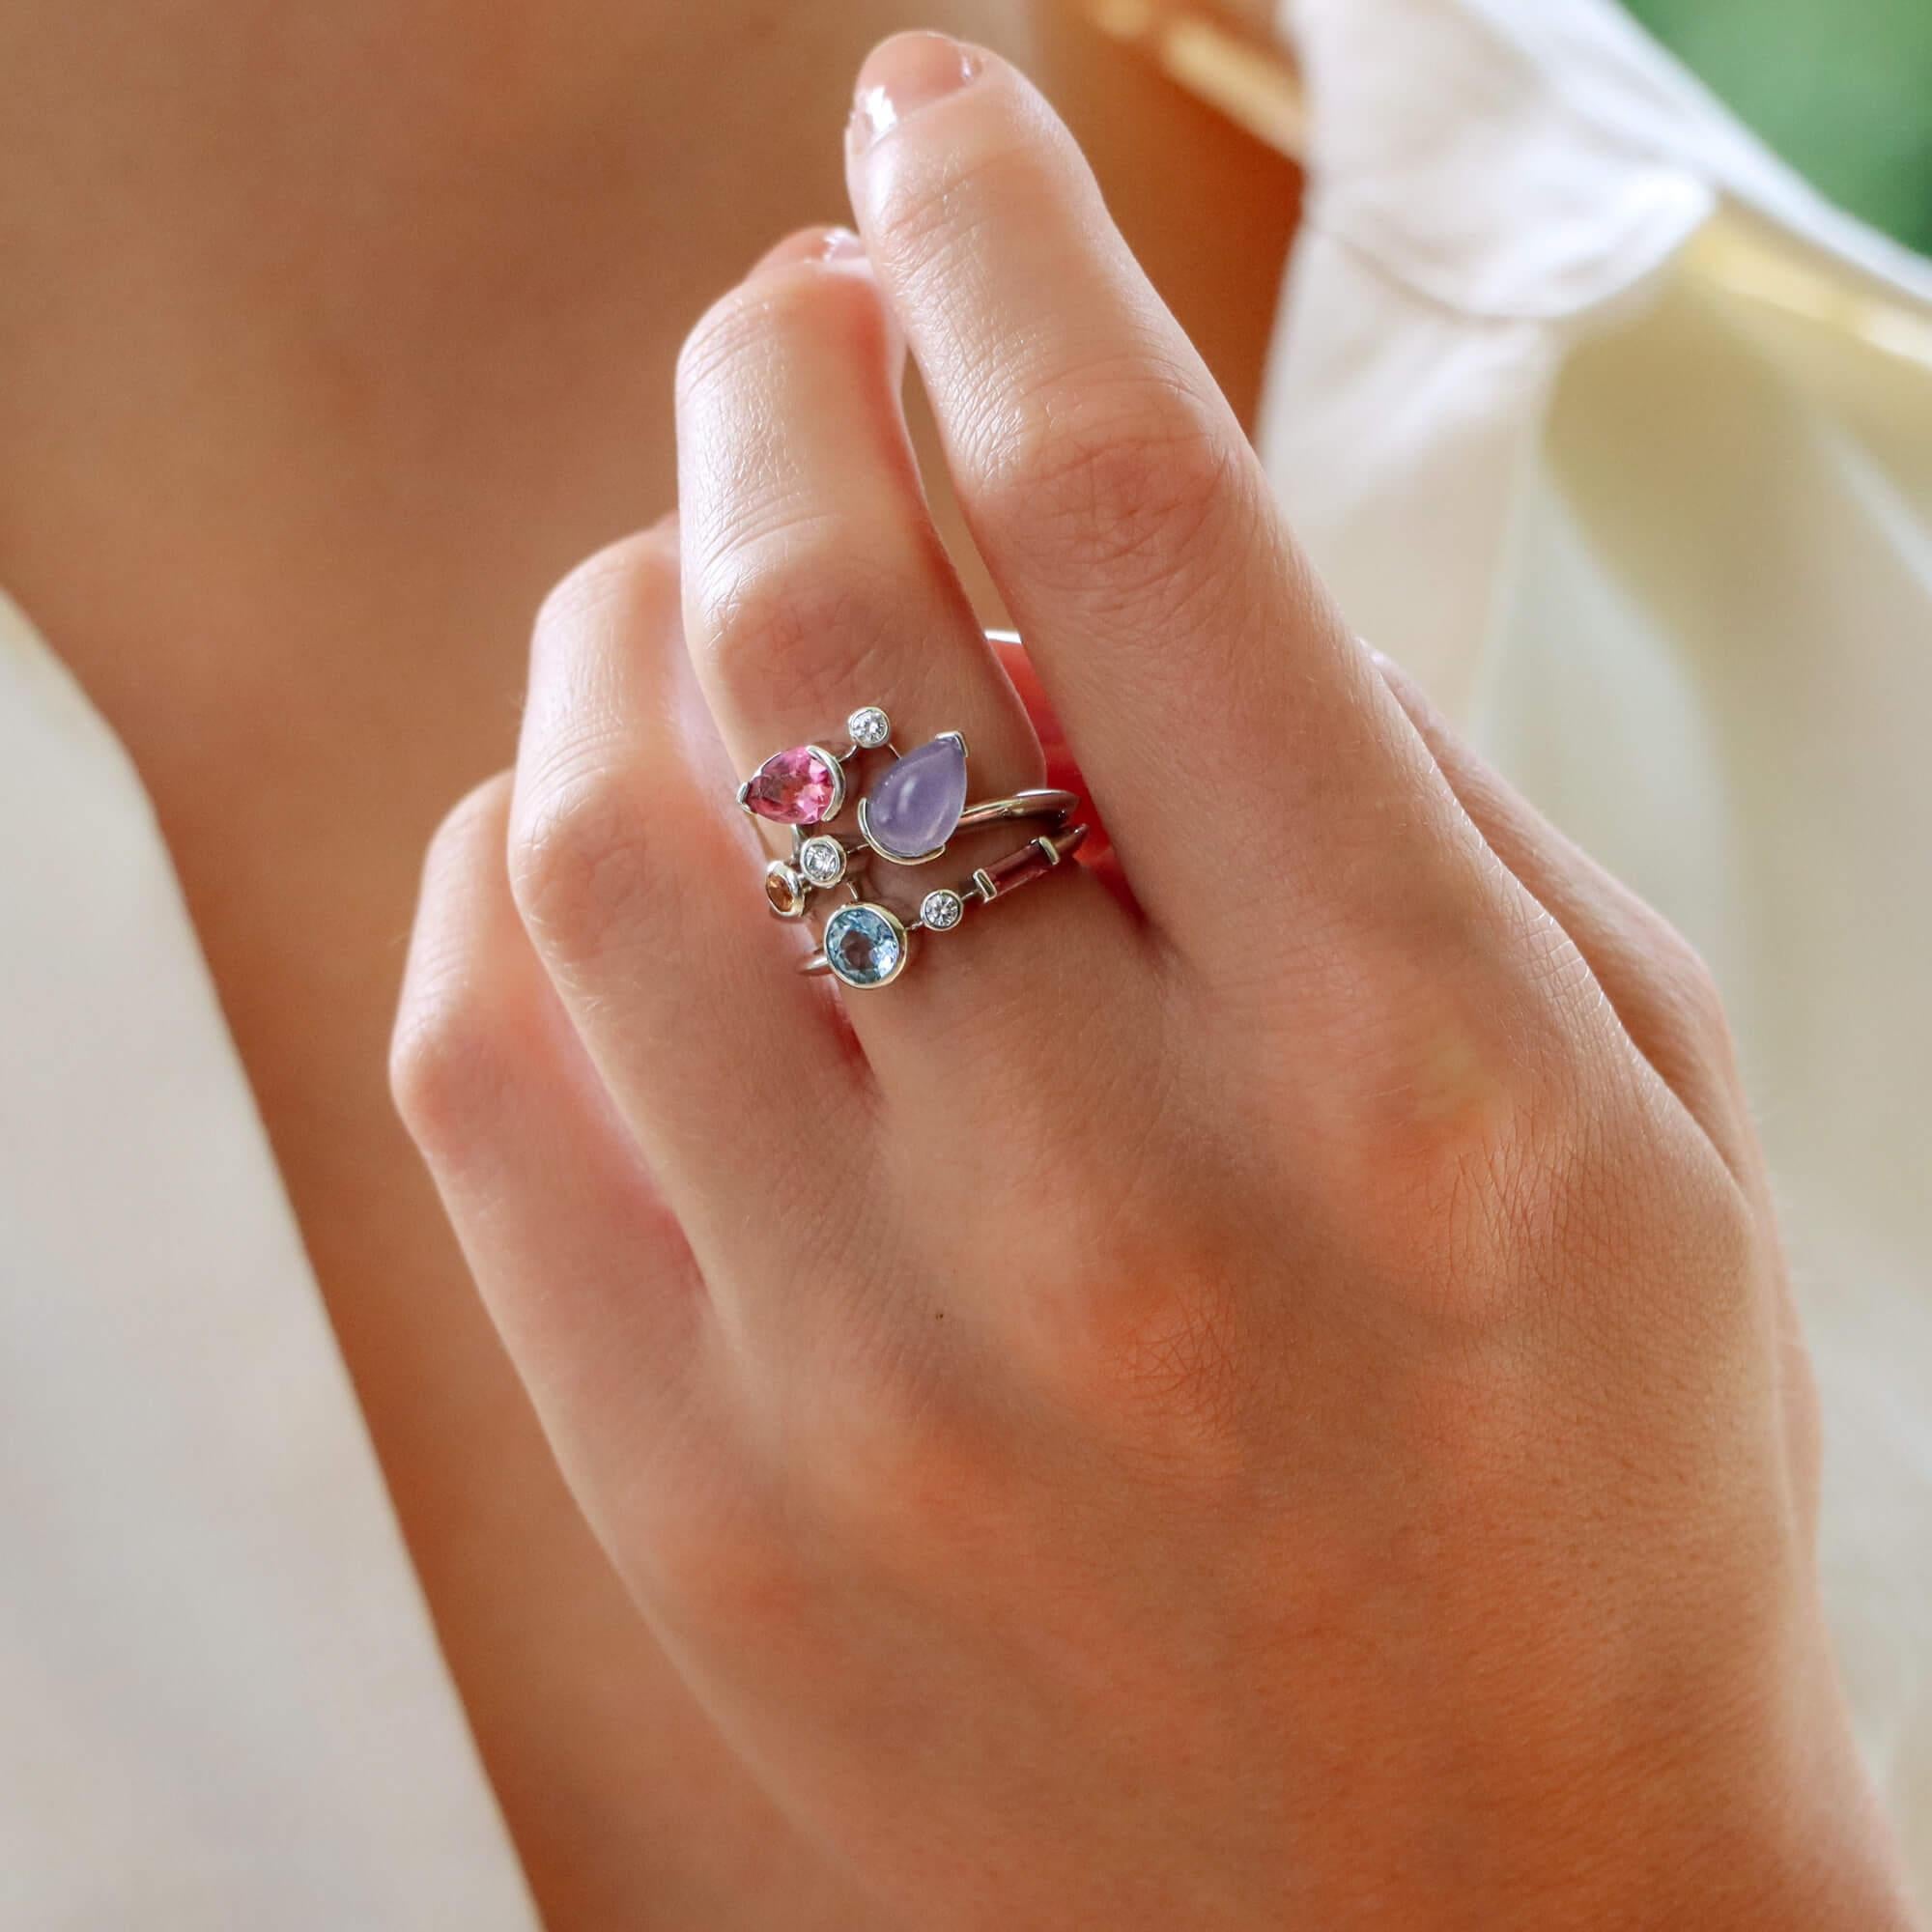 A rather unique vintage Cartier Meli Melo dress ring set in platinum. 

The ring is designed in a constellation format, set with a variety of beautiful precious and semi-precious gemstones. These gemstones include three round brilliant cut diamonds,